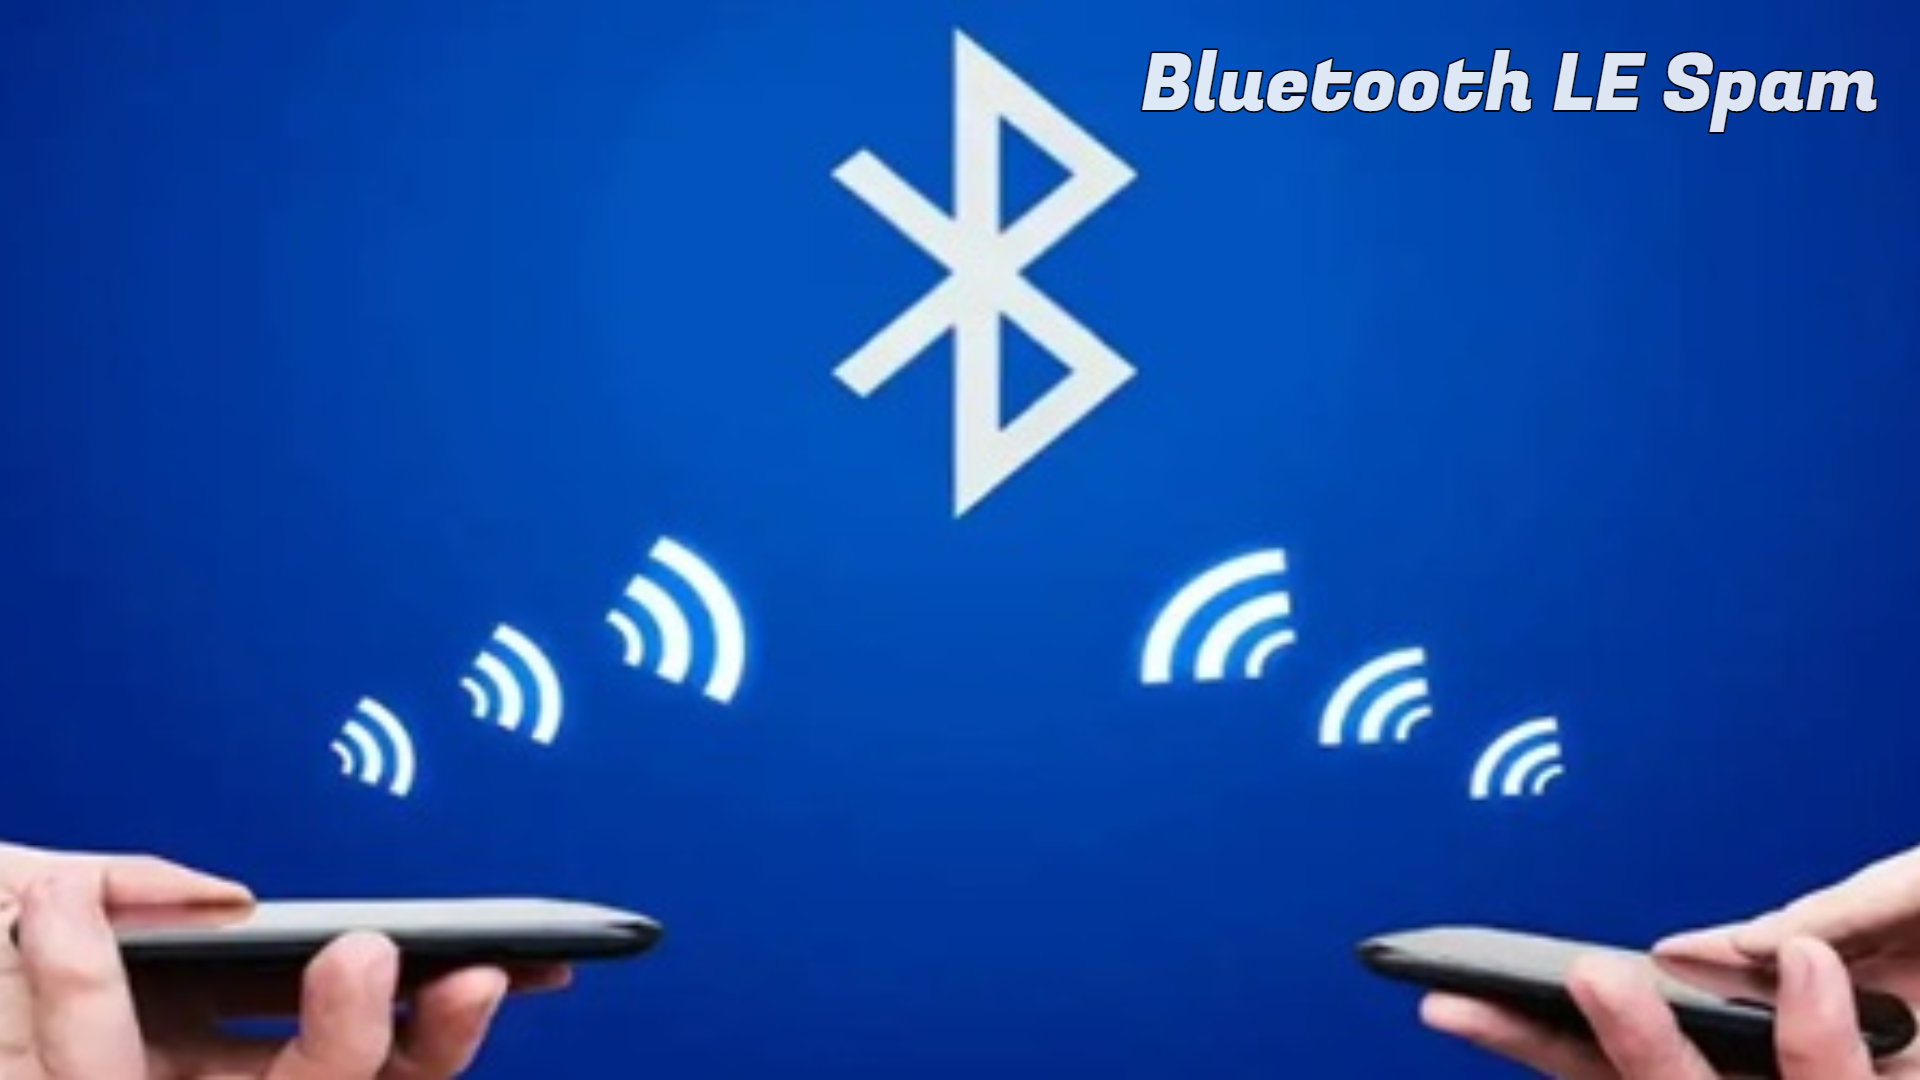 How to Download Bluetooth LE Spam Latest Version on Android